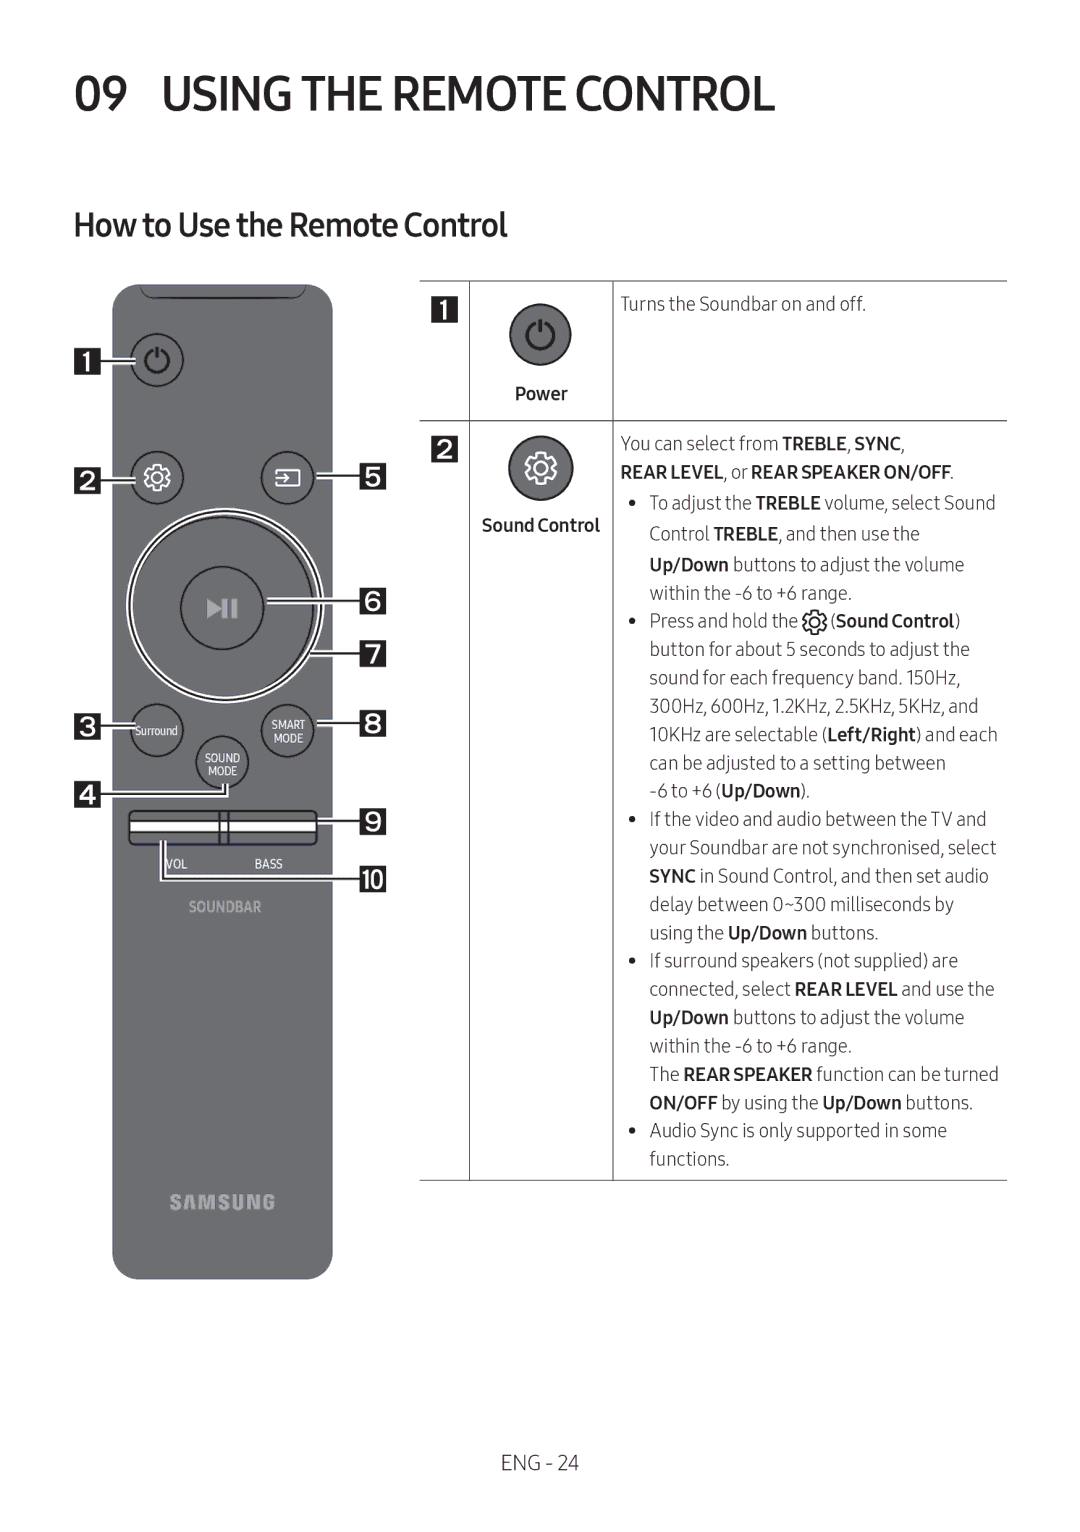 Samsung HW-MS6501/ZF, HW-MS6501/EN, HW-MS6500/ZG, HW-MS6500/EN manual Using the Remote Control, How to Use the Remote Control 